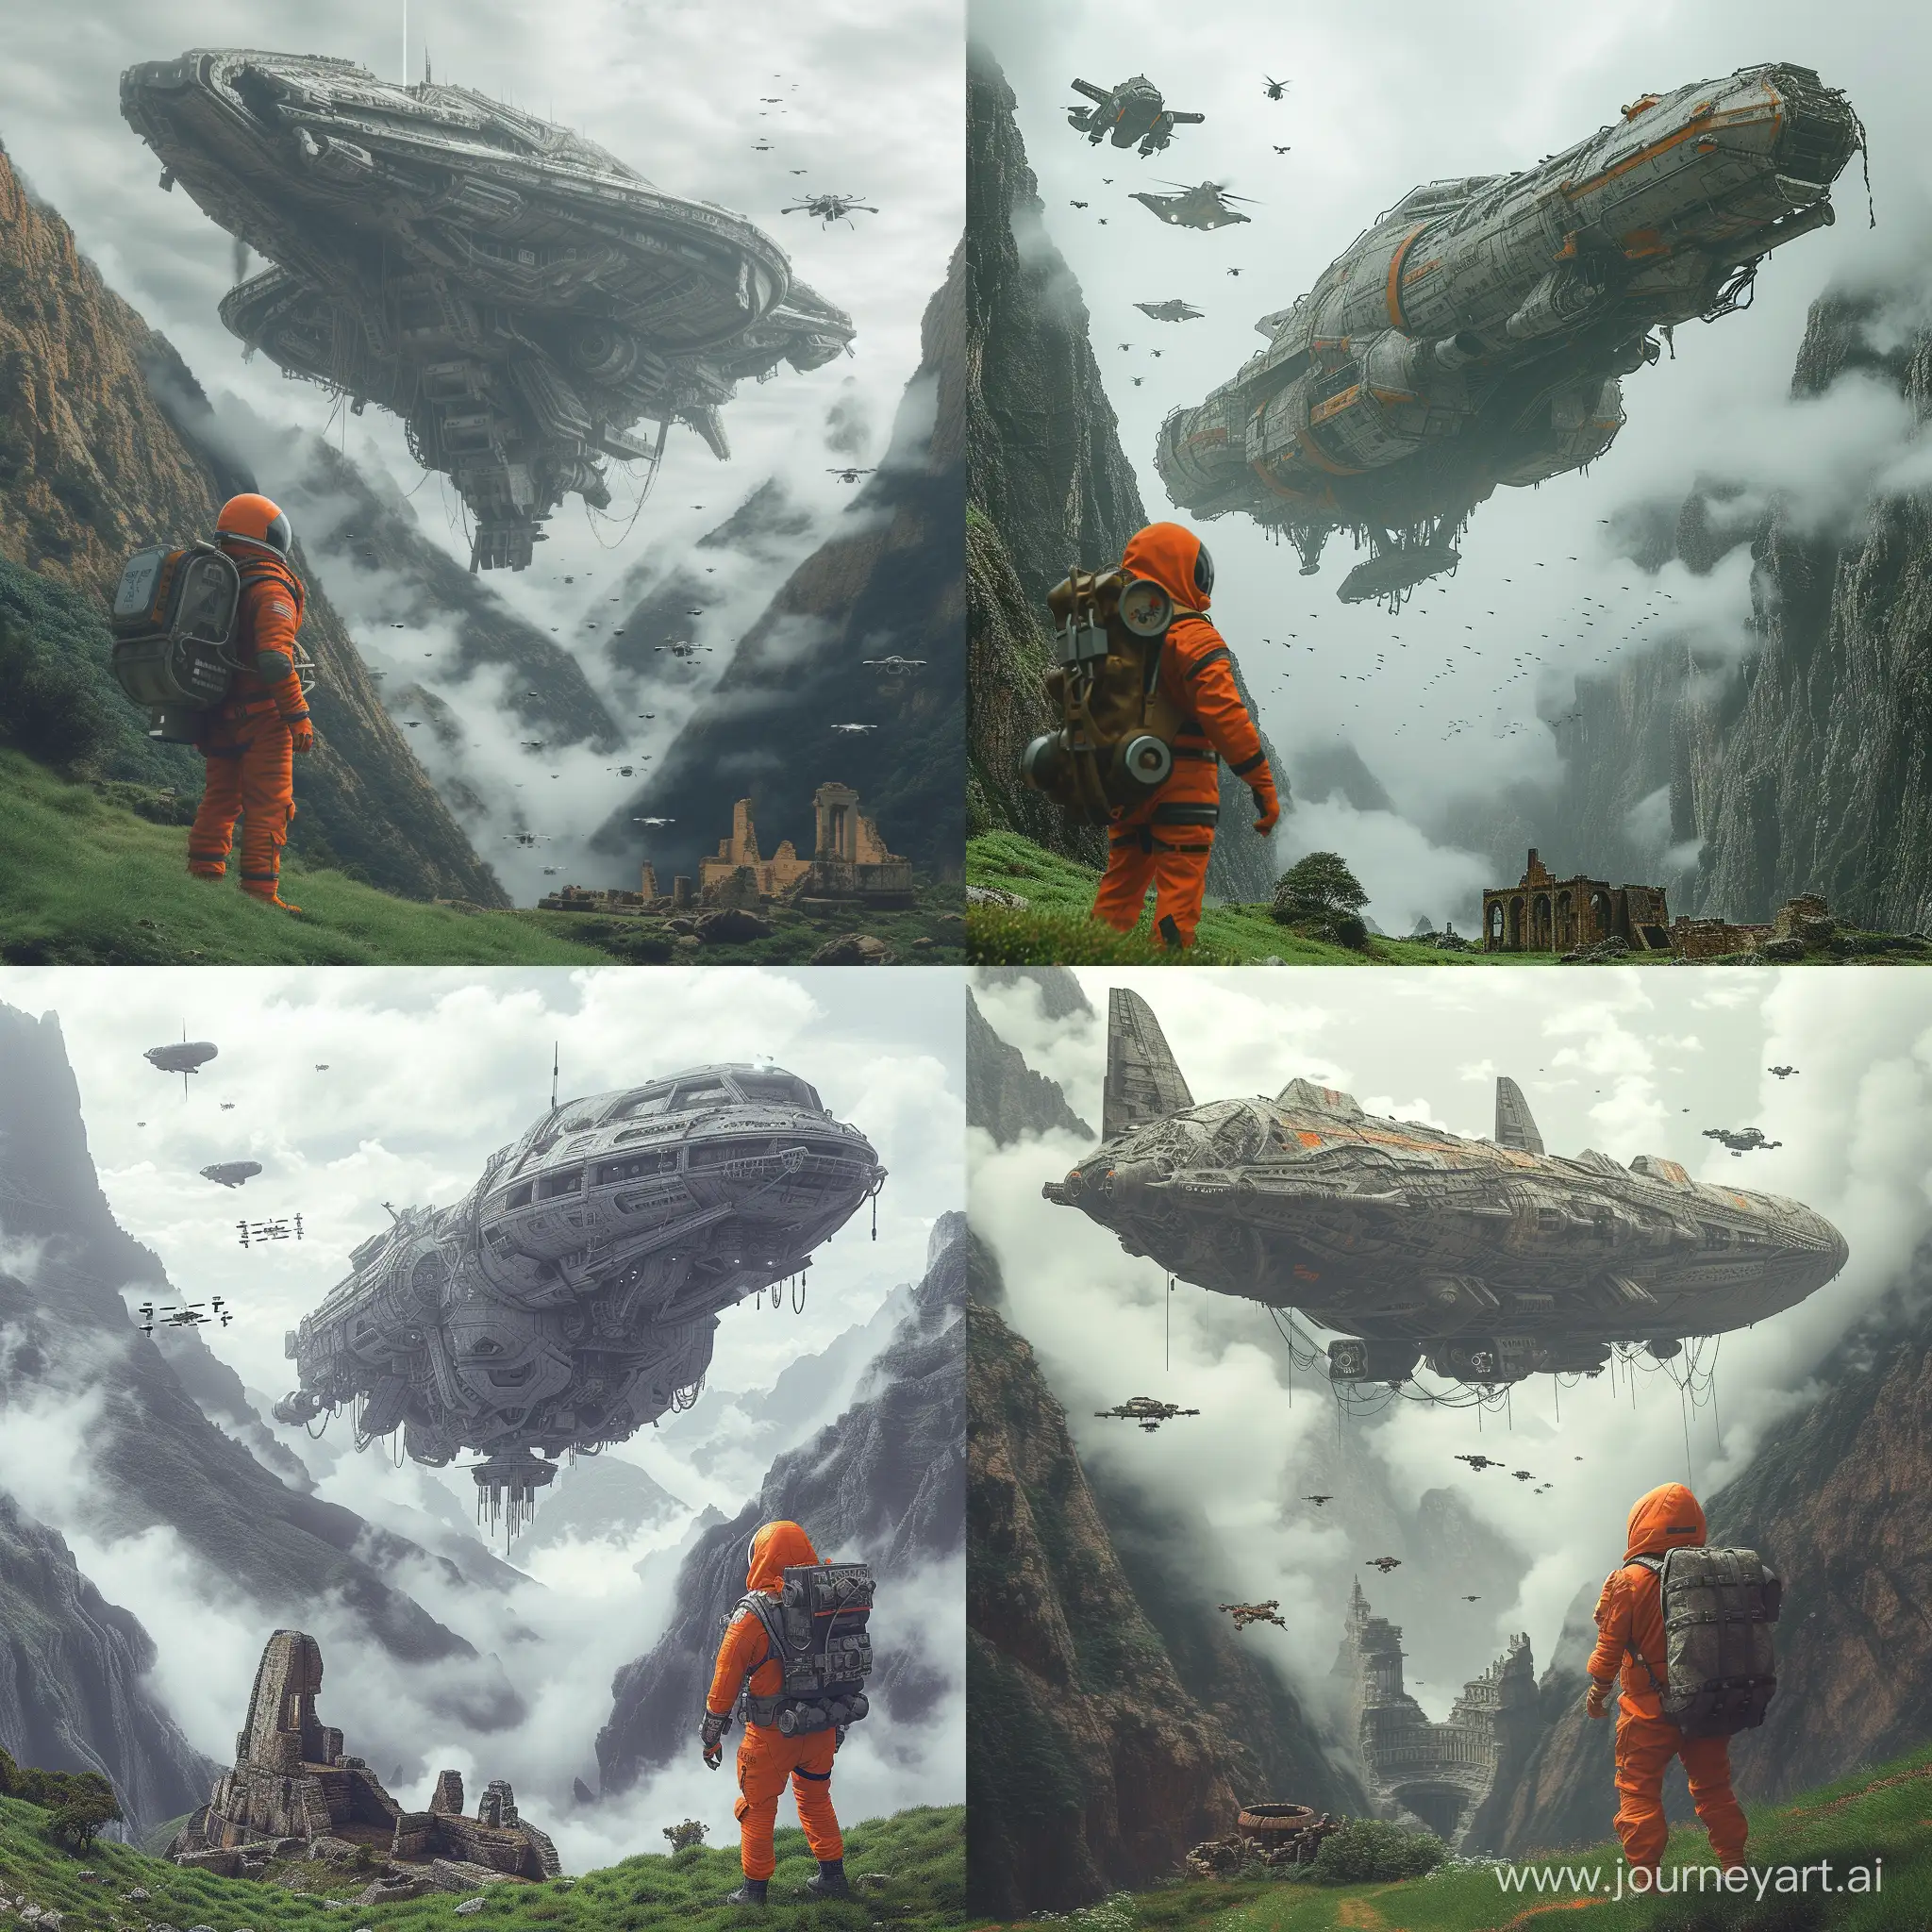 Explorer-in-Orange-Spacesuit-Observing-Ancient-Spaceship-Amidst-Misty-Mountains